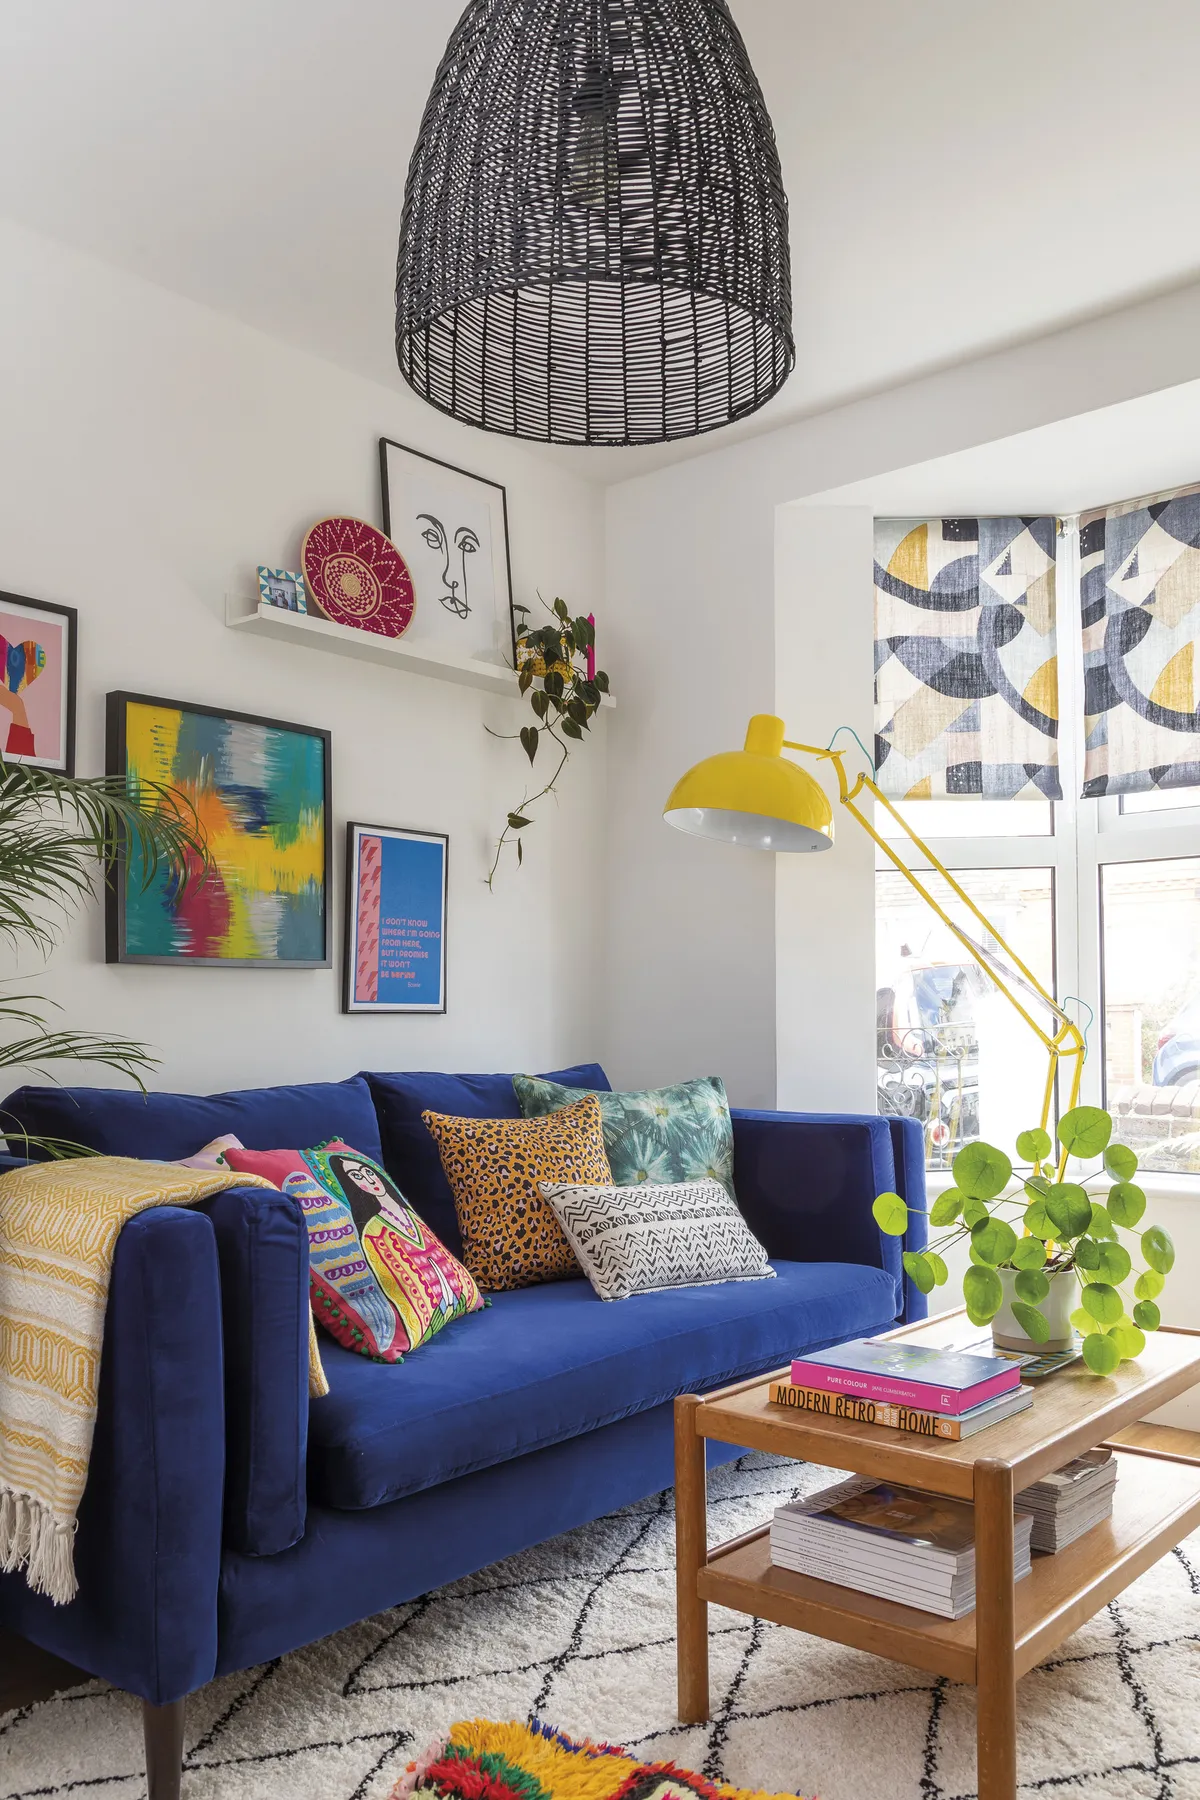 Gemma loves colour and wanted to bring a touch of the exotic to her home. A relatively compact space, she planned her layout meticulously, measuring every piece of furniture to ensure it fitted the proportions